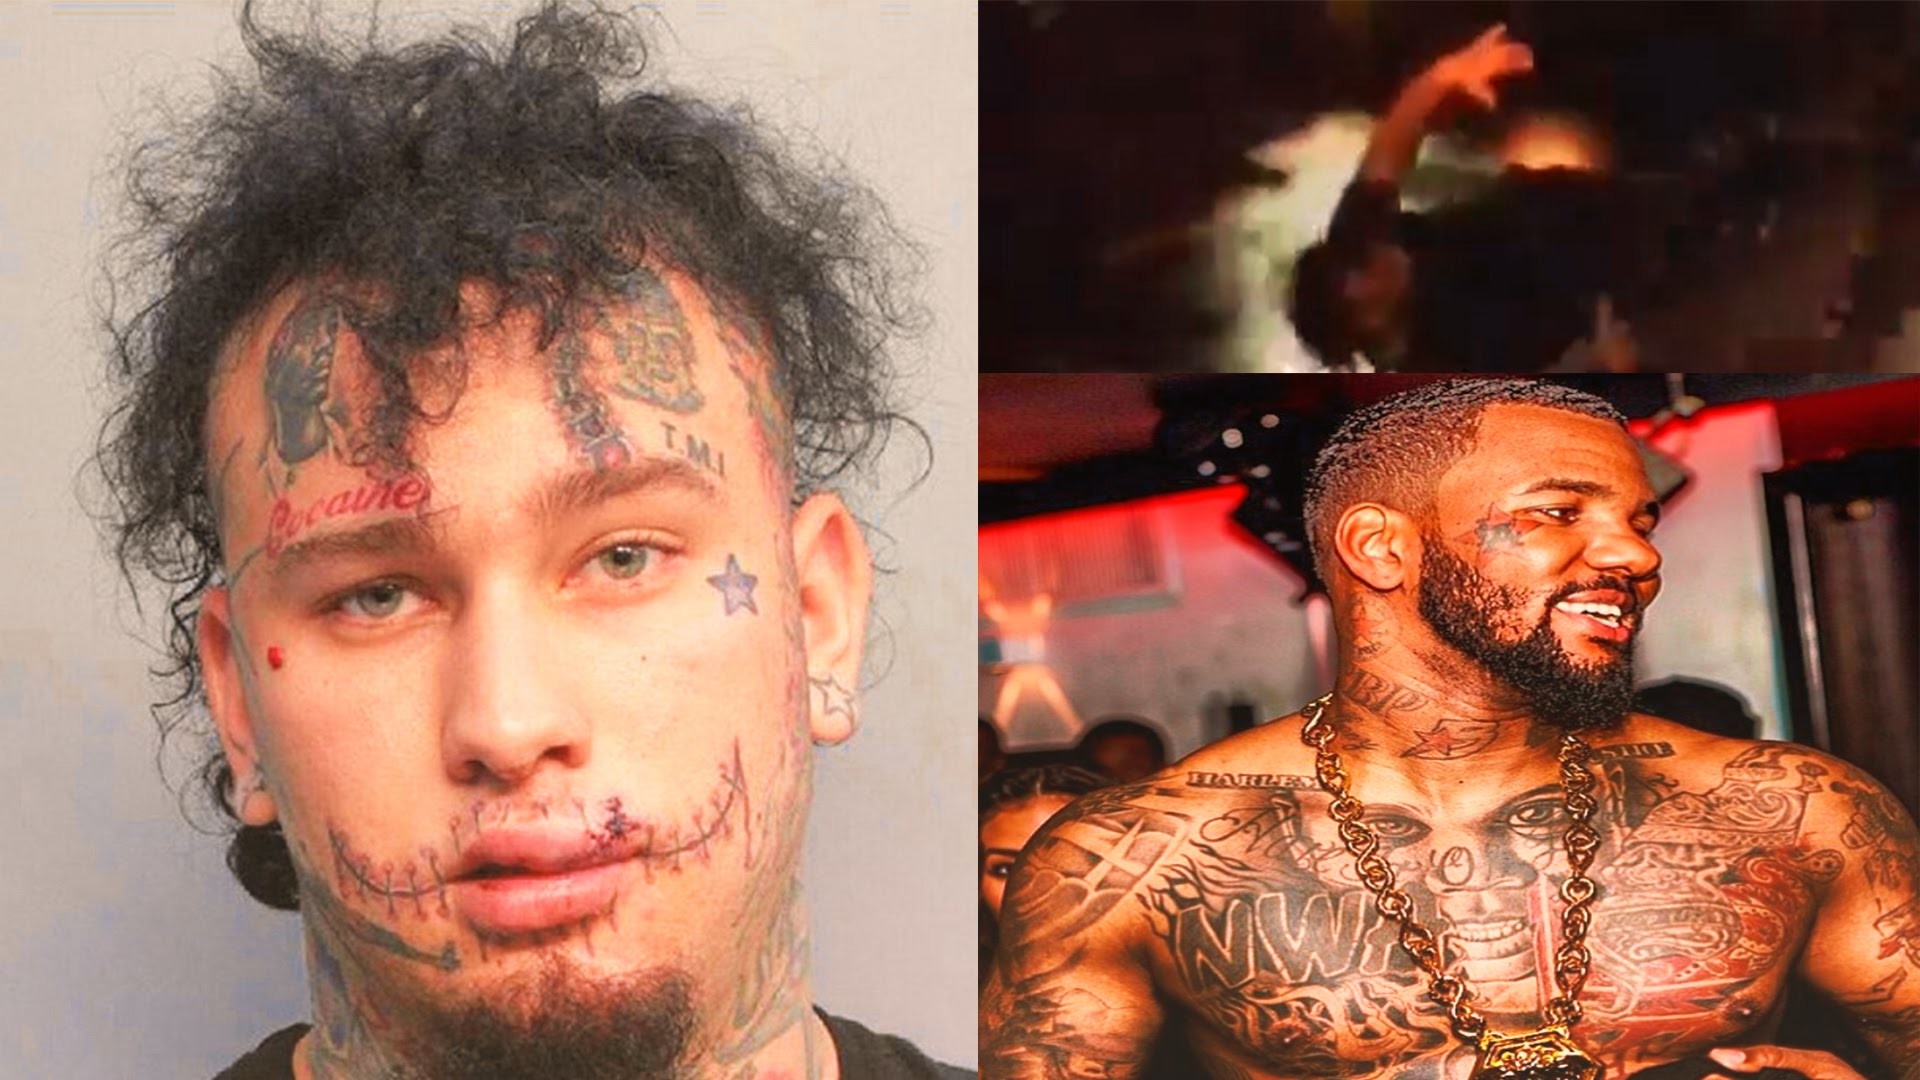 1920x1080 RAPPER THE GAME VS. STITCHES BEEF--STITCHES KO'ED IN MIAMI STREETS AFTER  STALKING GAME (Funny Video) - YouTube